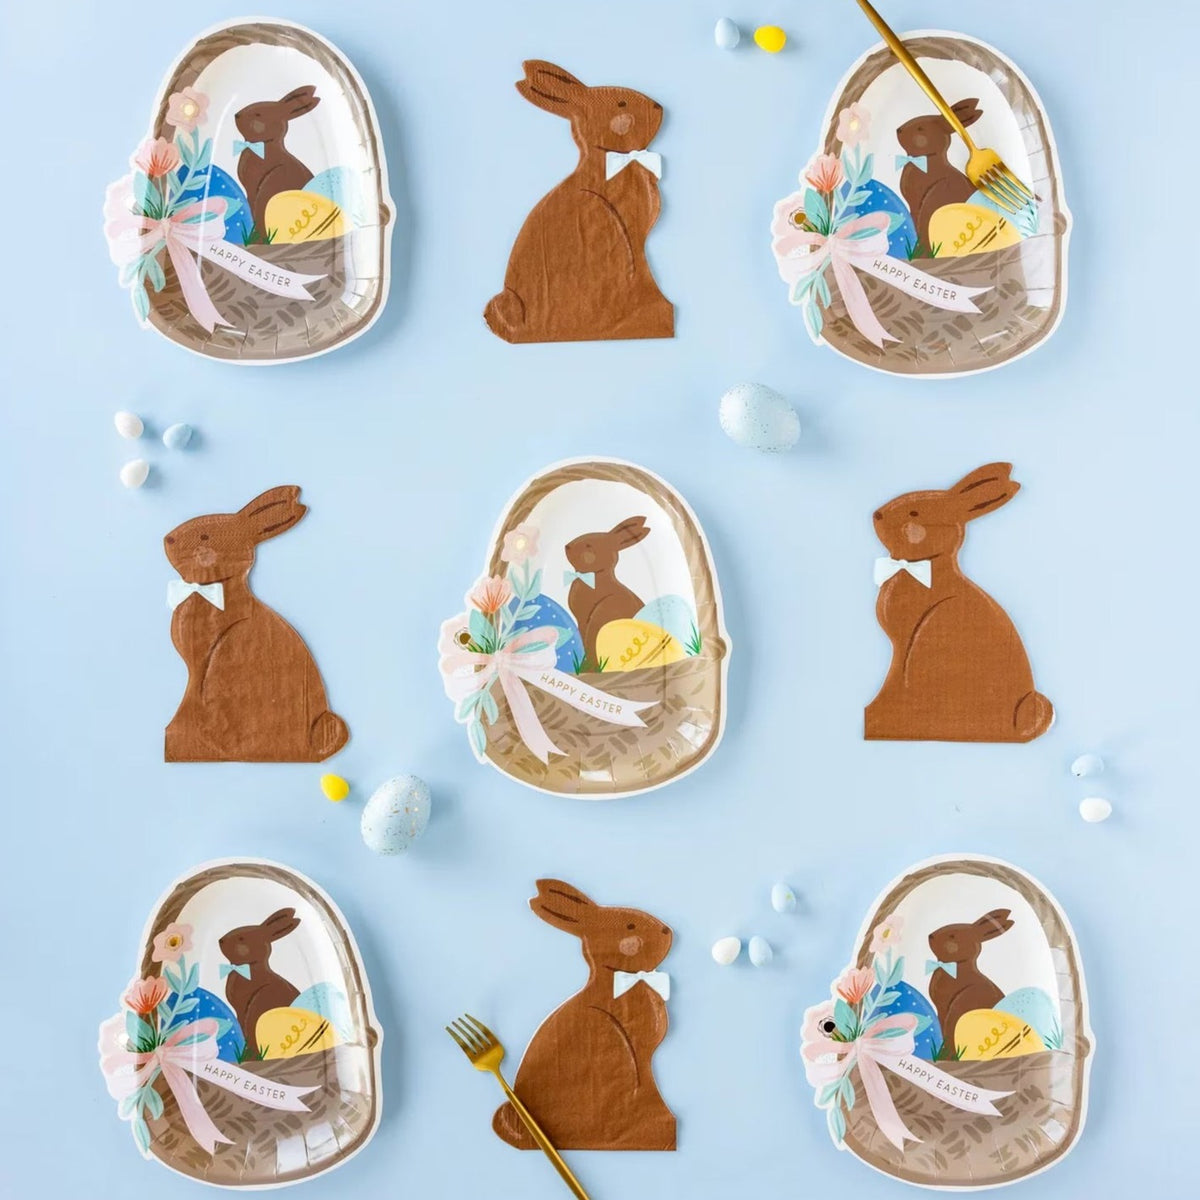 A chocolate bunny shaped paper easter napkins with a cute bow tie - perfect for an easter party or an easter brunch.